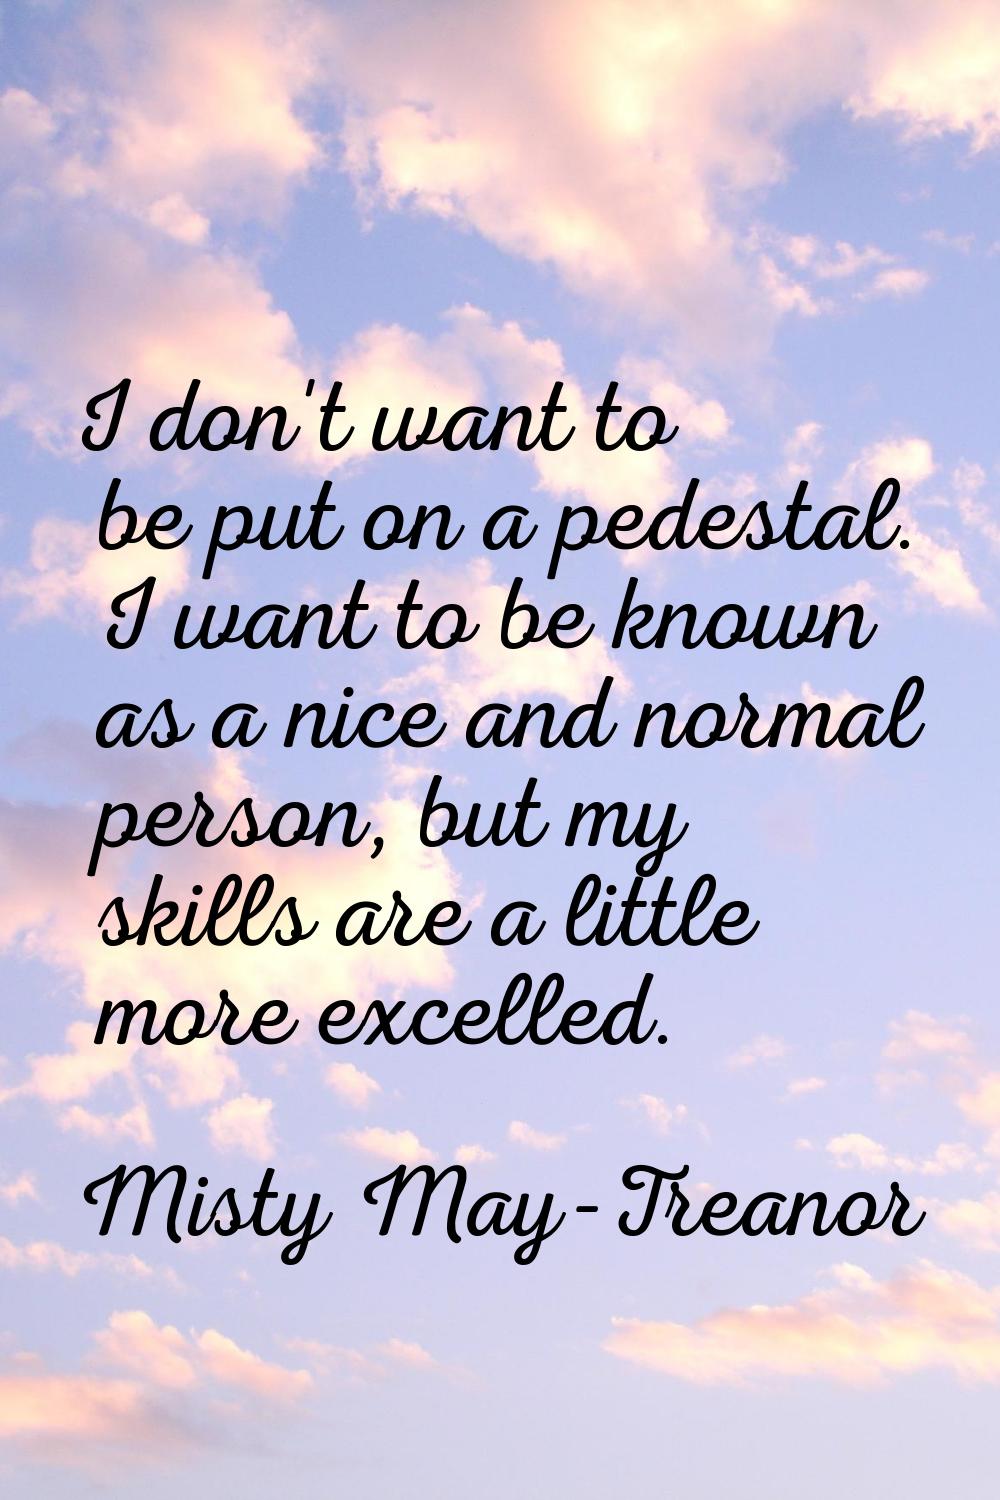 I don't want to be put on a pedestal. I want to be known as a nice and normal person, but my skills